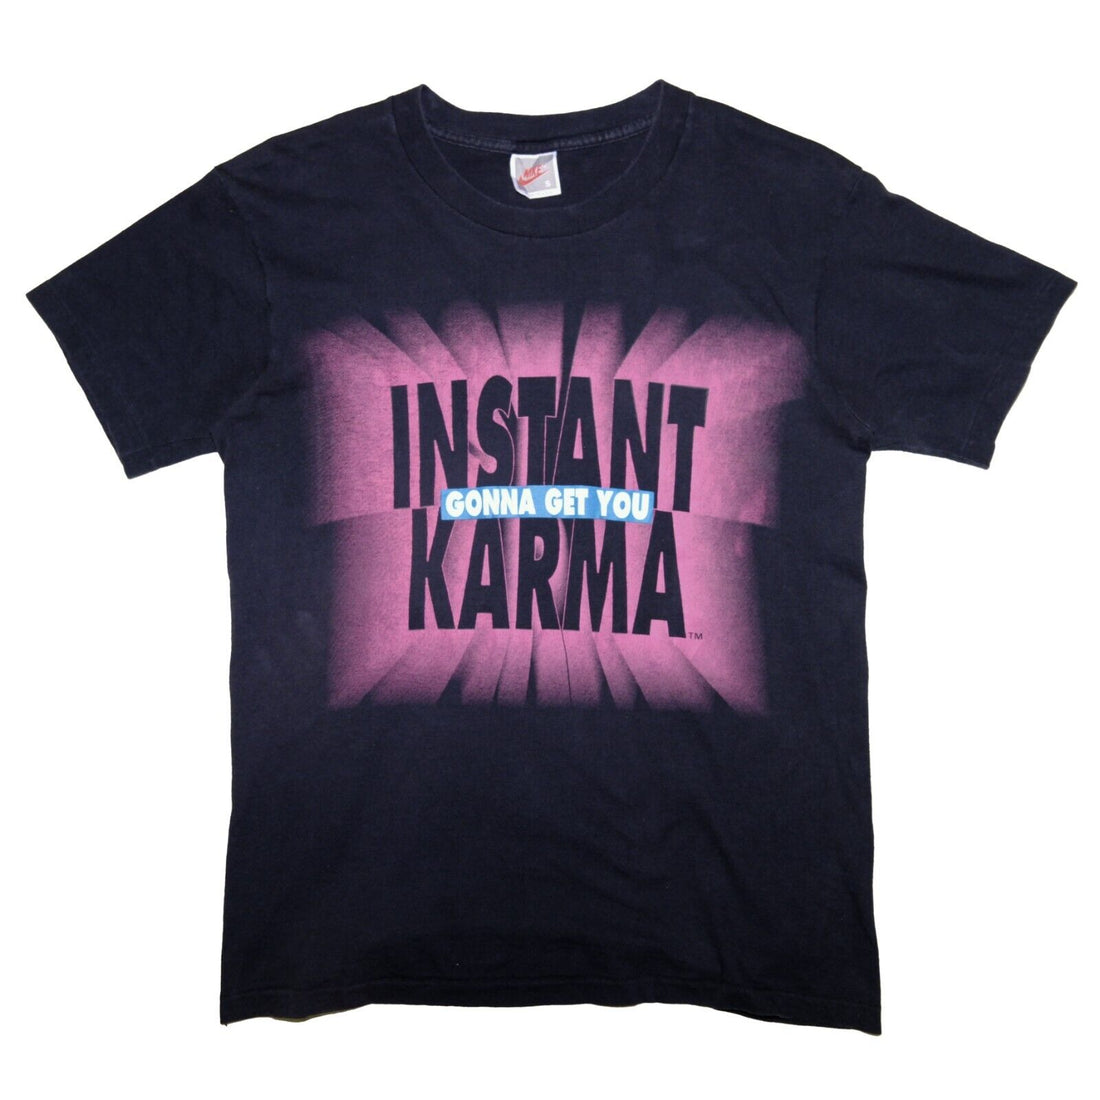 Vintage Instant Karma Join The Human Race Nike T-Shirt Size Small Black 80s 90s